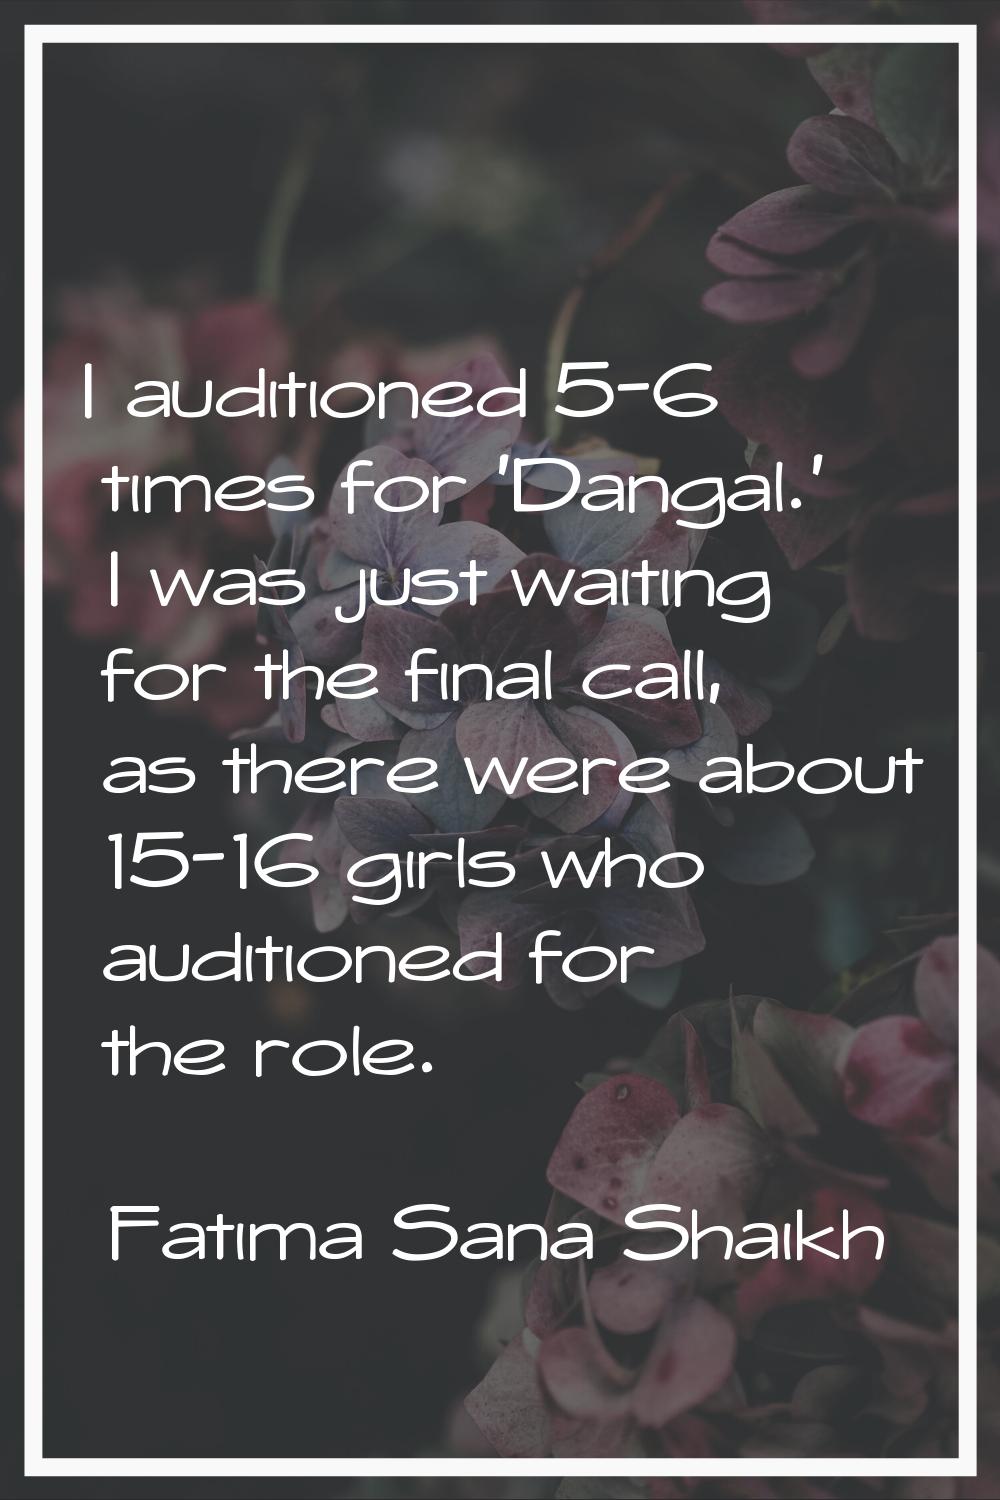 I auditioned 5-6 times for 'Dangal.' I was just waiting for the final call, as there were about 15-